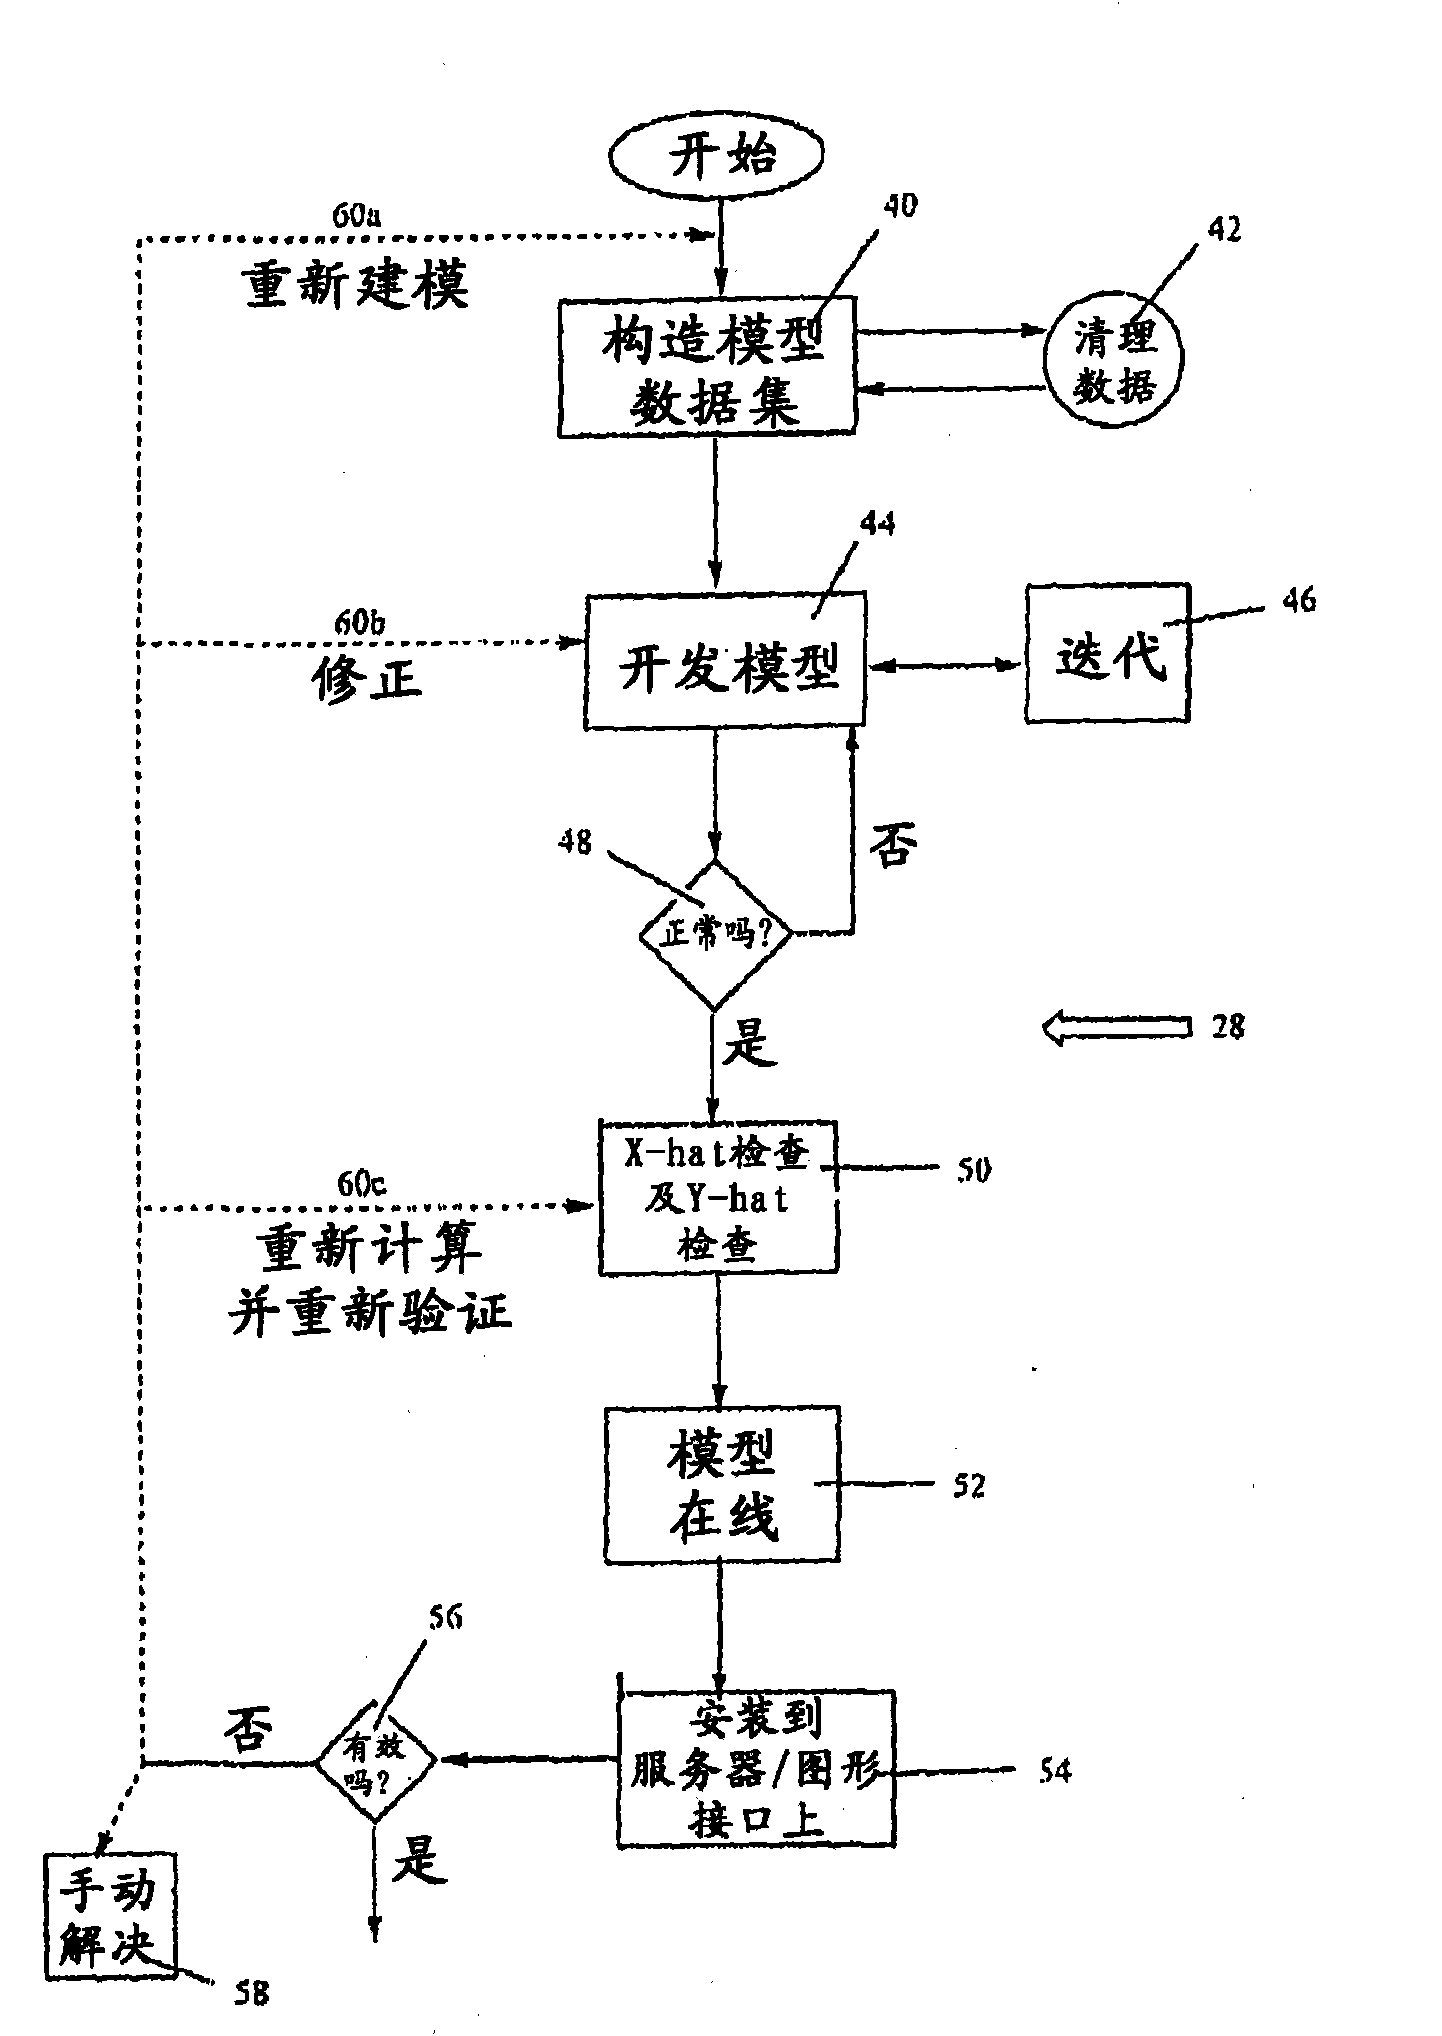 System and methods for continuous, online monitoring of a chemical plant or refinery